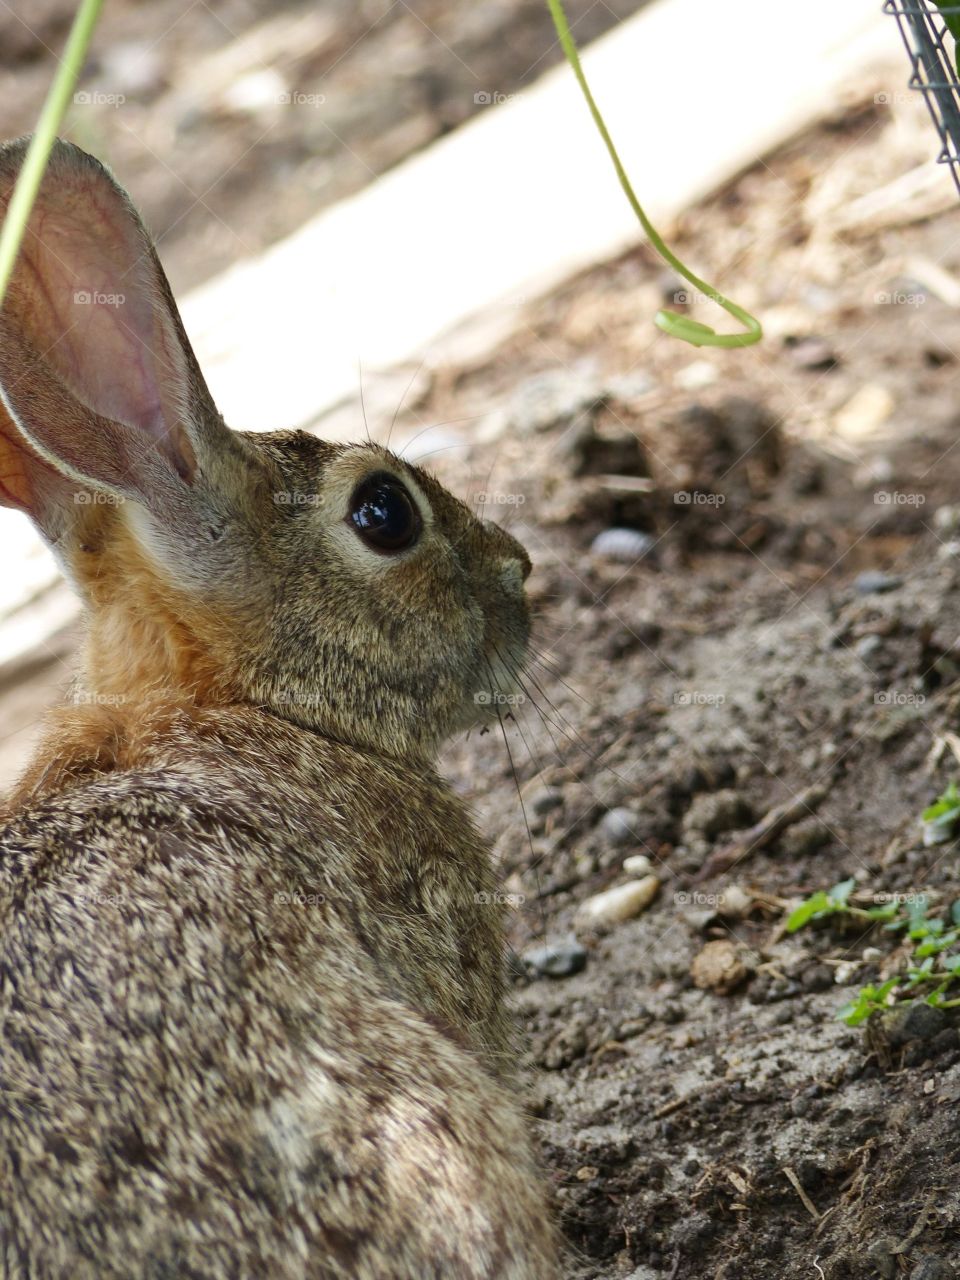 Bunny at an angle in the garden